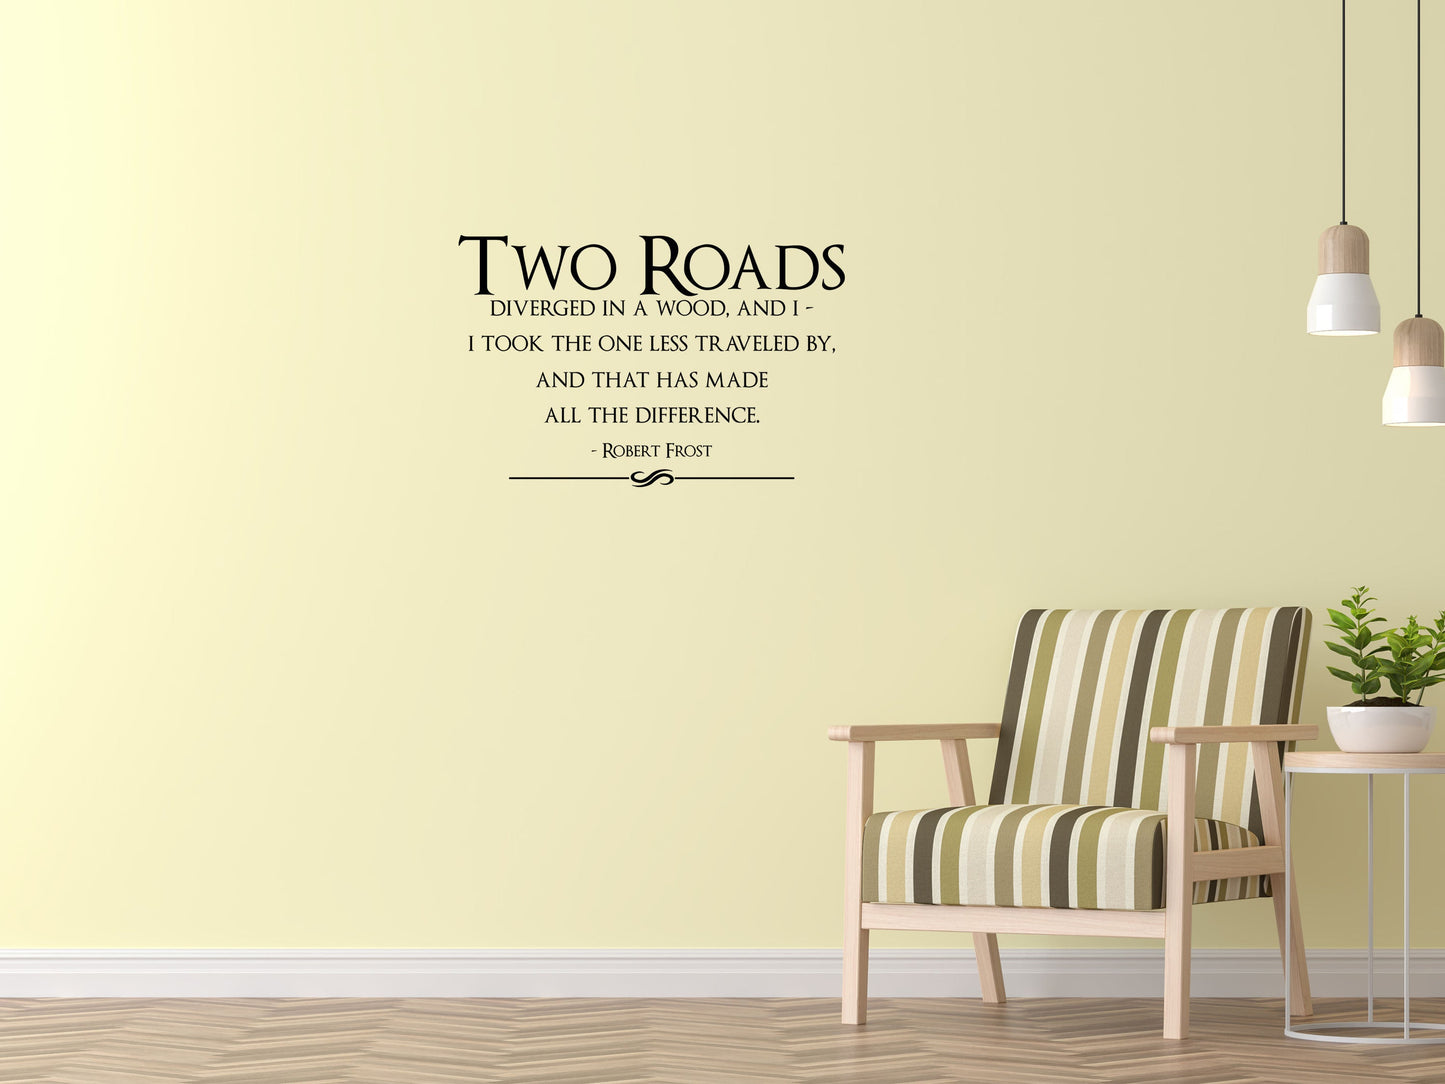 Two Roads Less Traveled - Inspirational Wall Signs Vinyl Wall Decal Inspirational Wall Signs 